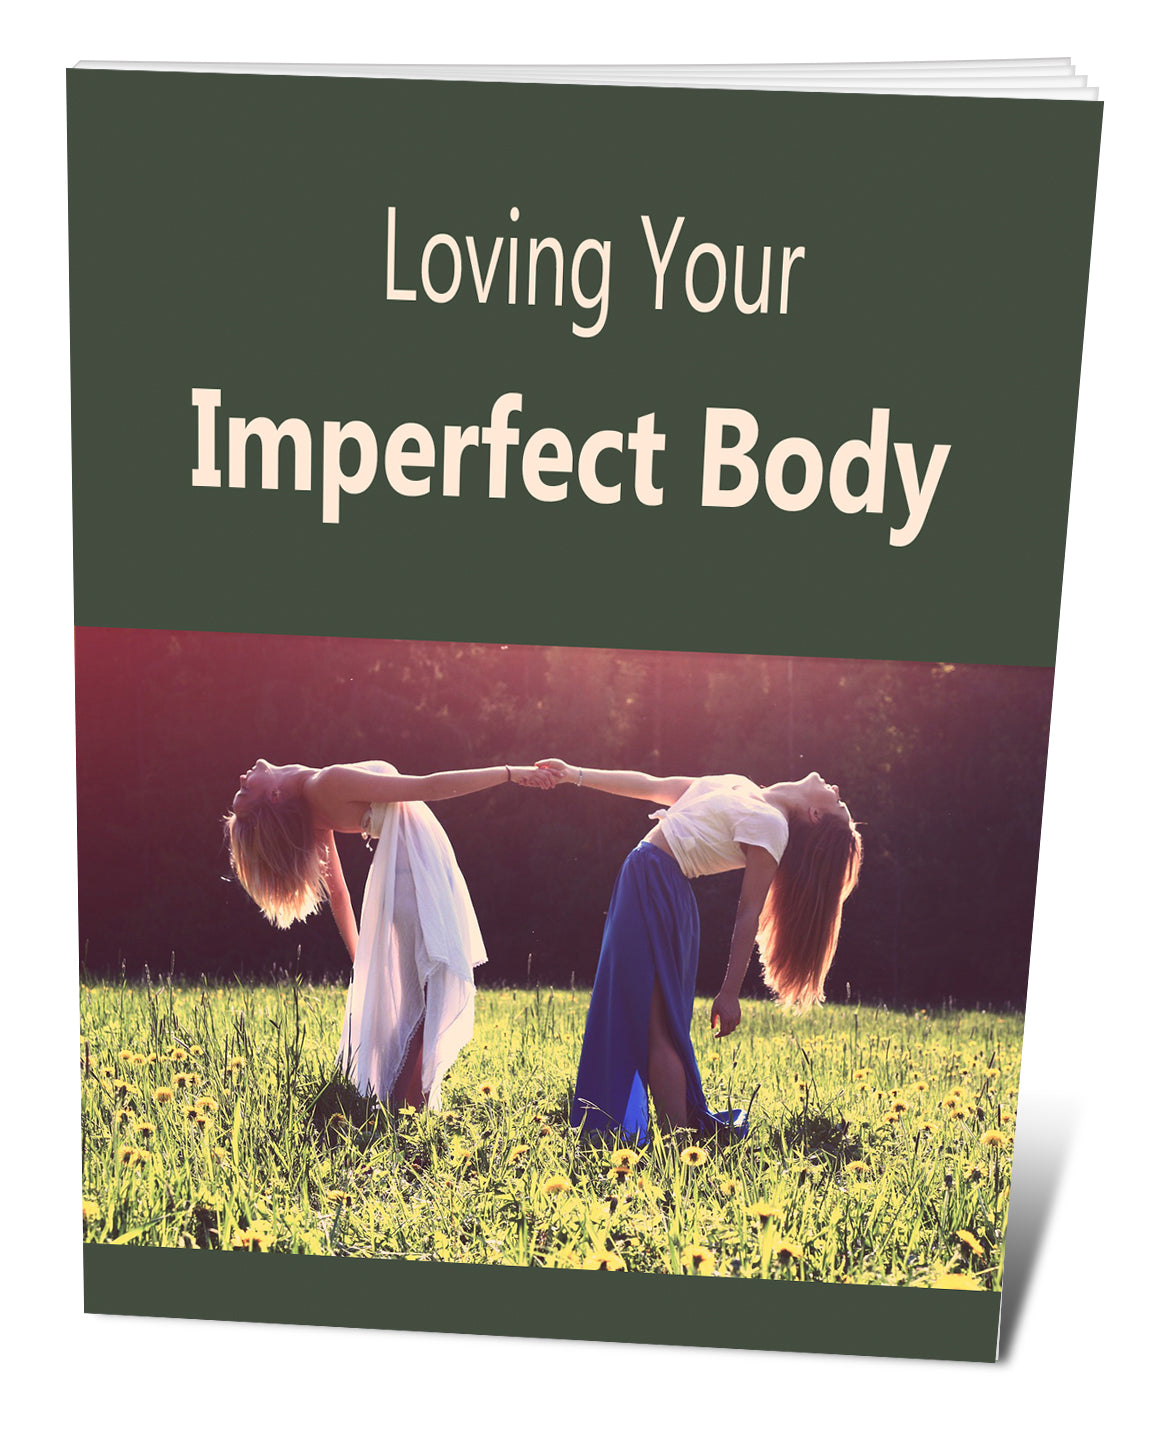 Loving Your Imperfect Body